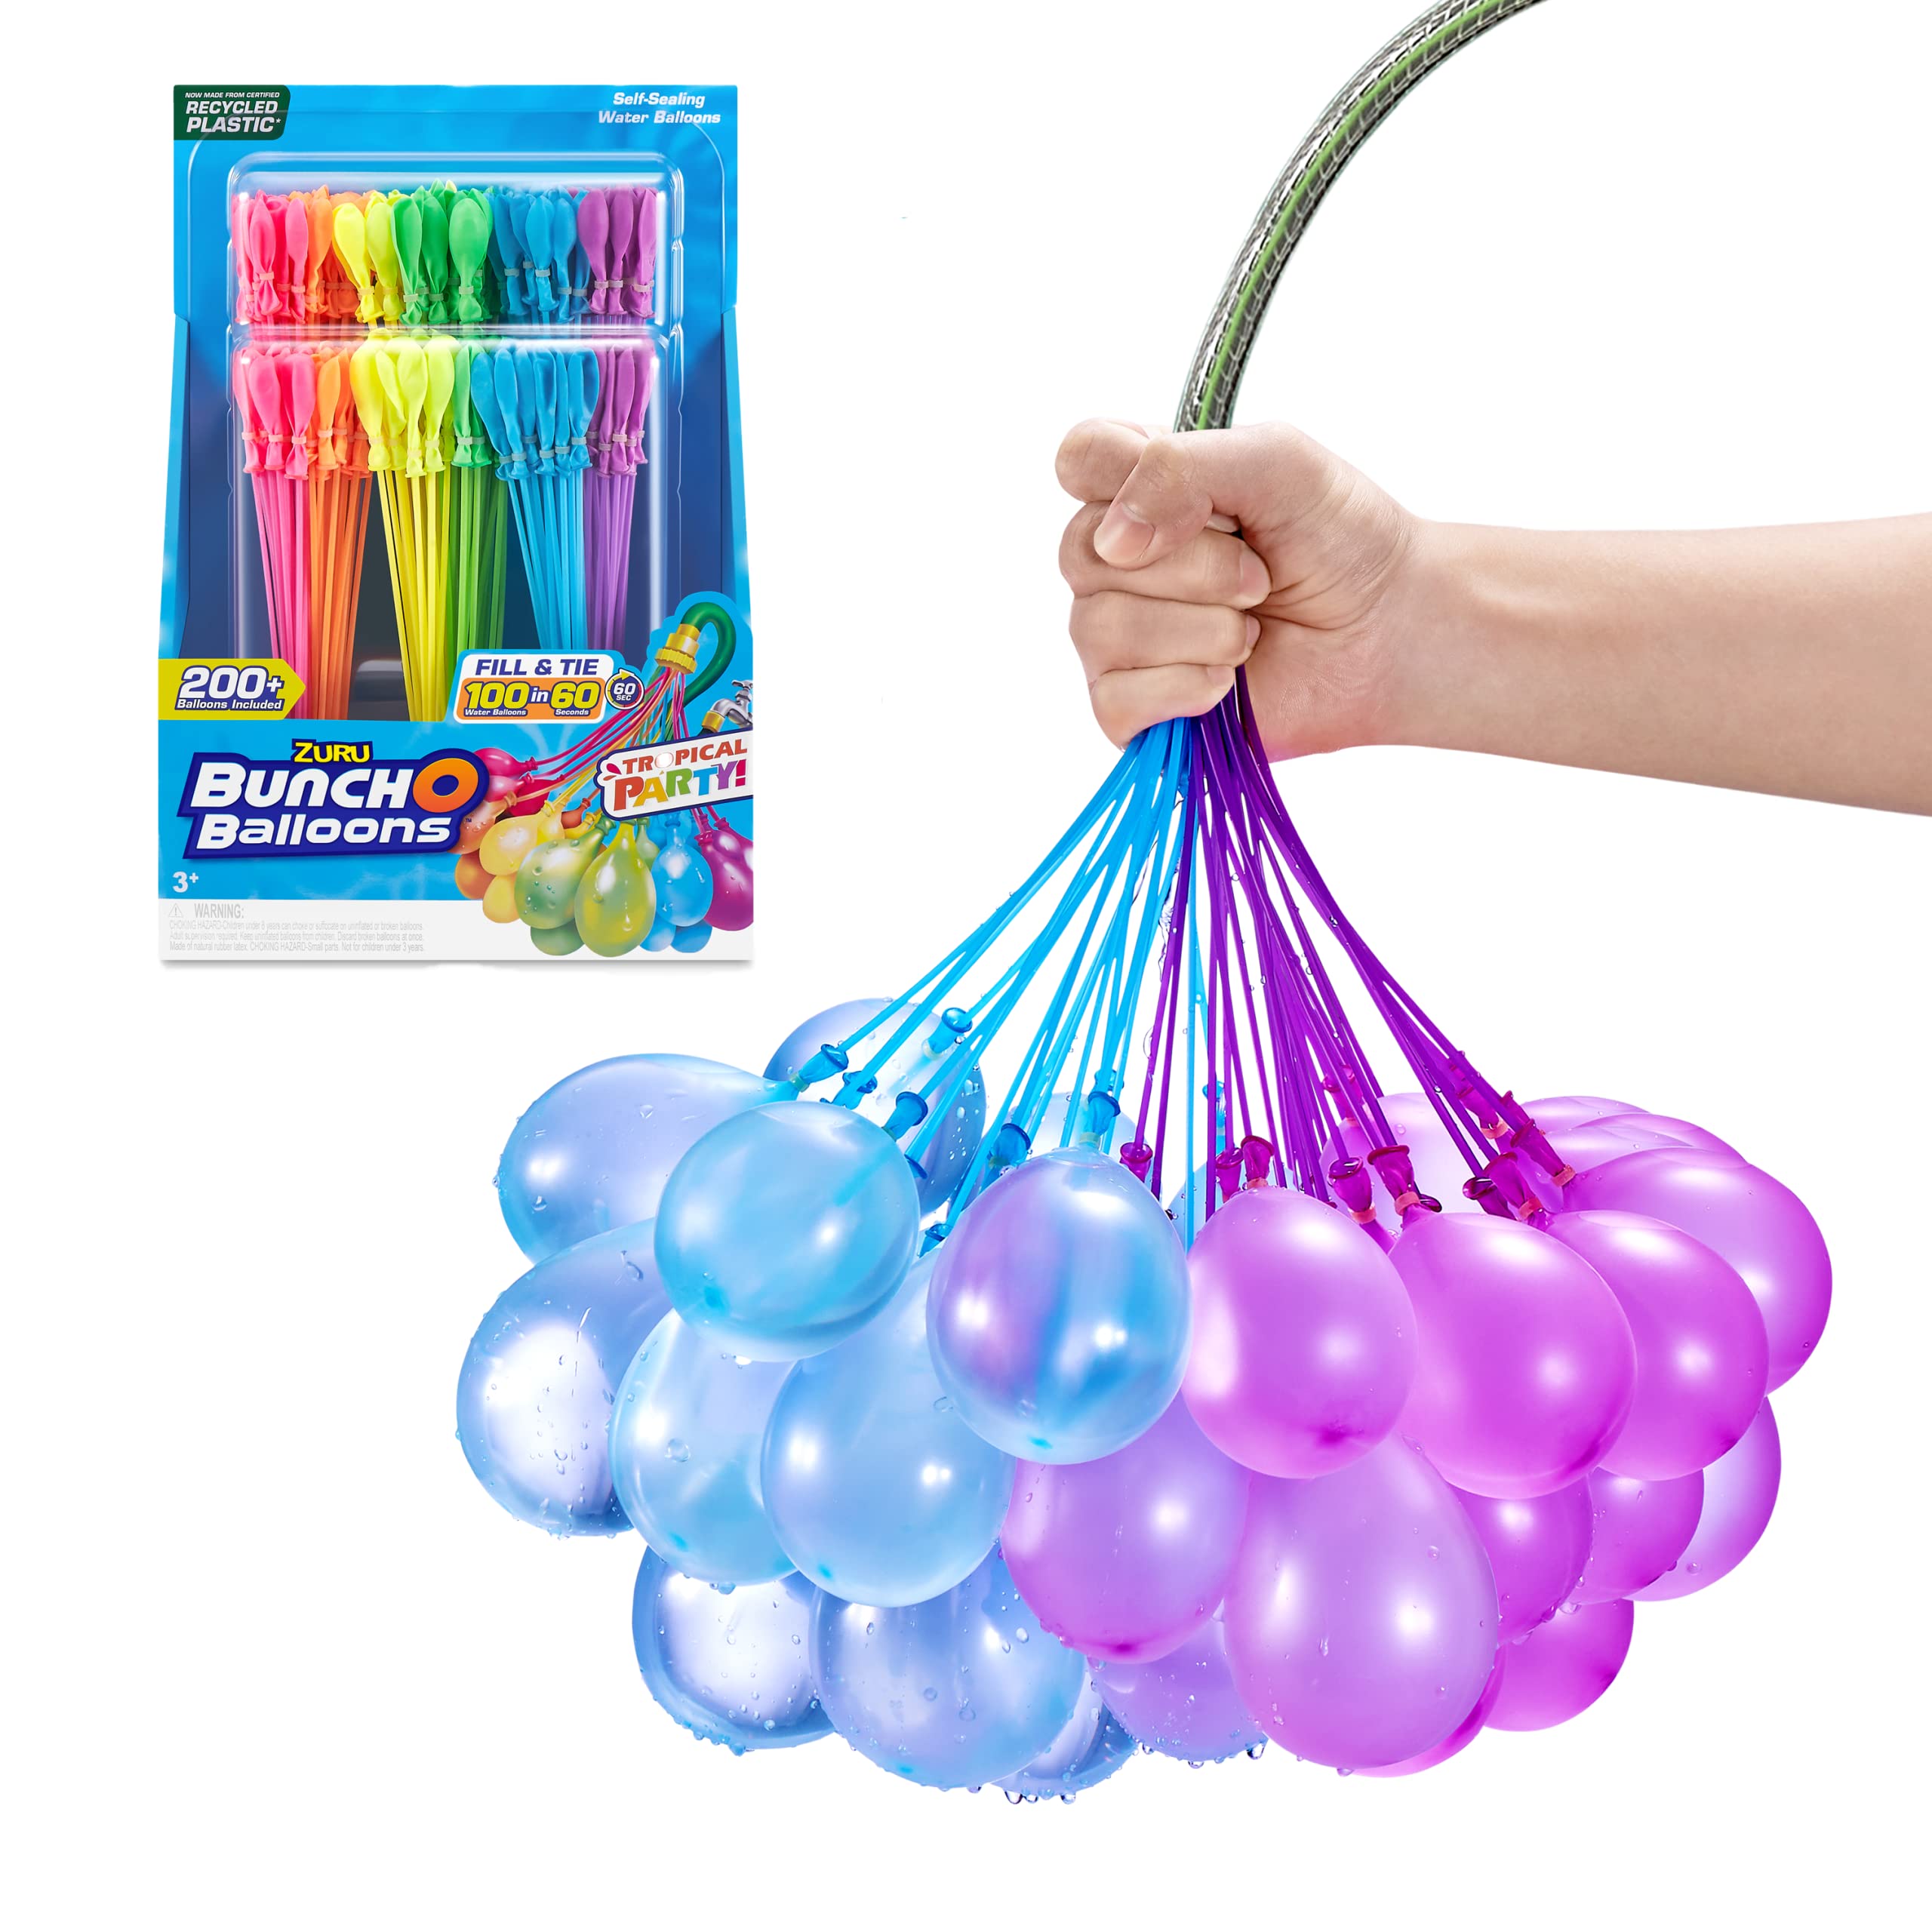 Bunch O Balloons Tropical Party (6 Pack) by ZURU, 200+ Rapid-Filling Self-Sealing Tropical Colored Water Balloons for Outdoor Family, Friends, Children Summer Fun (6 Pack)